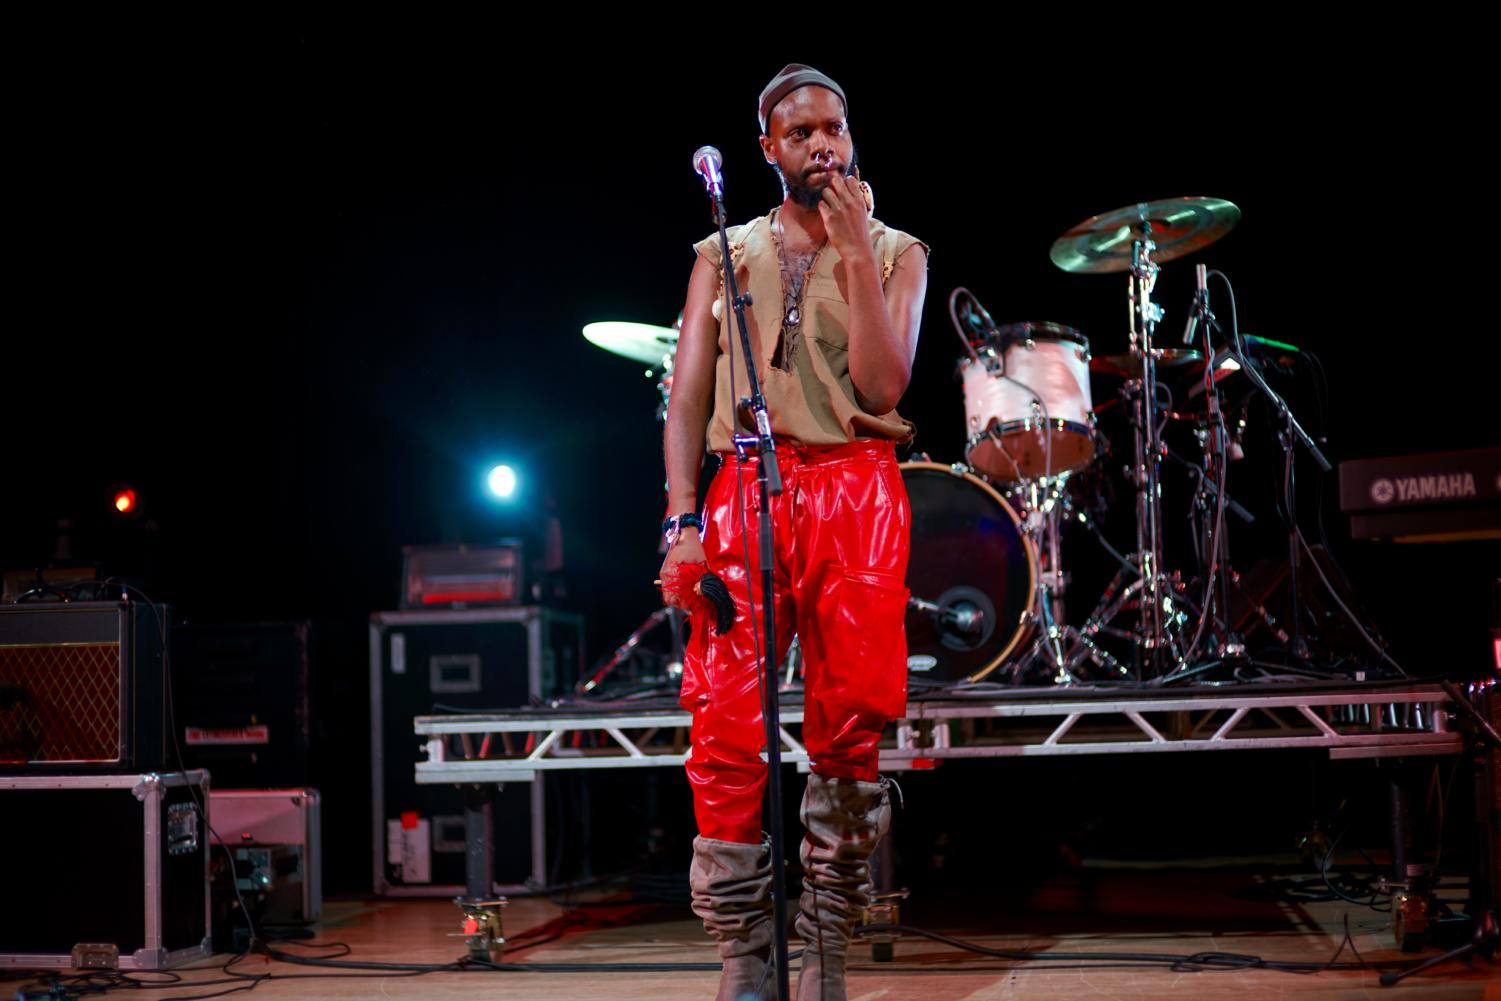 serpentwithfeet, decked out in red leather pants and heeled boots, addresses audience